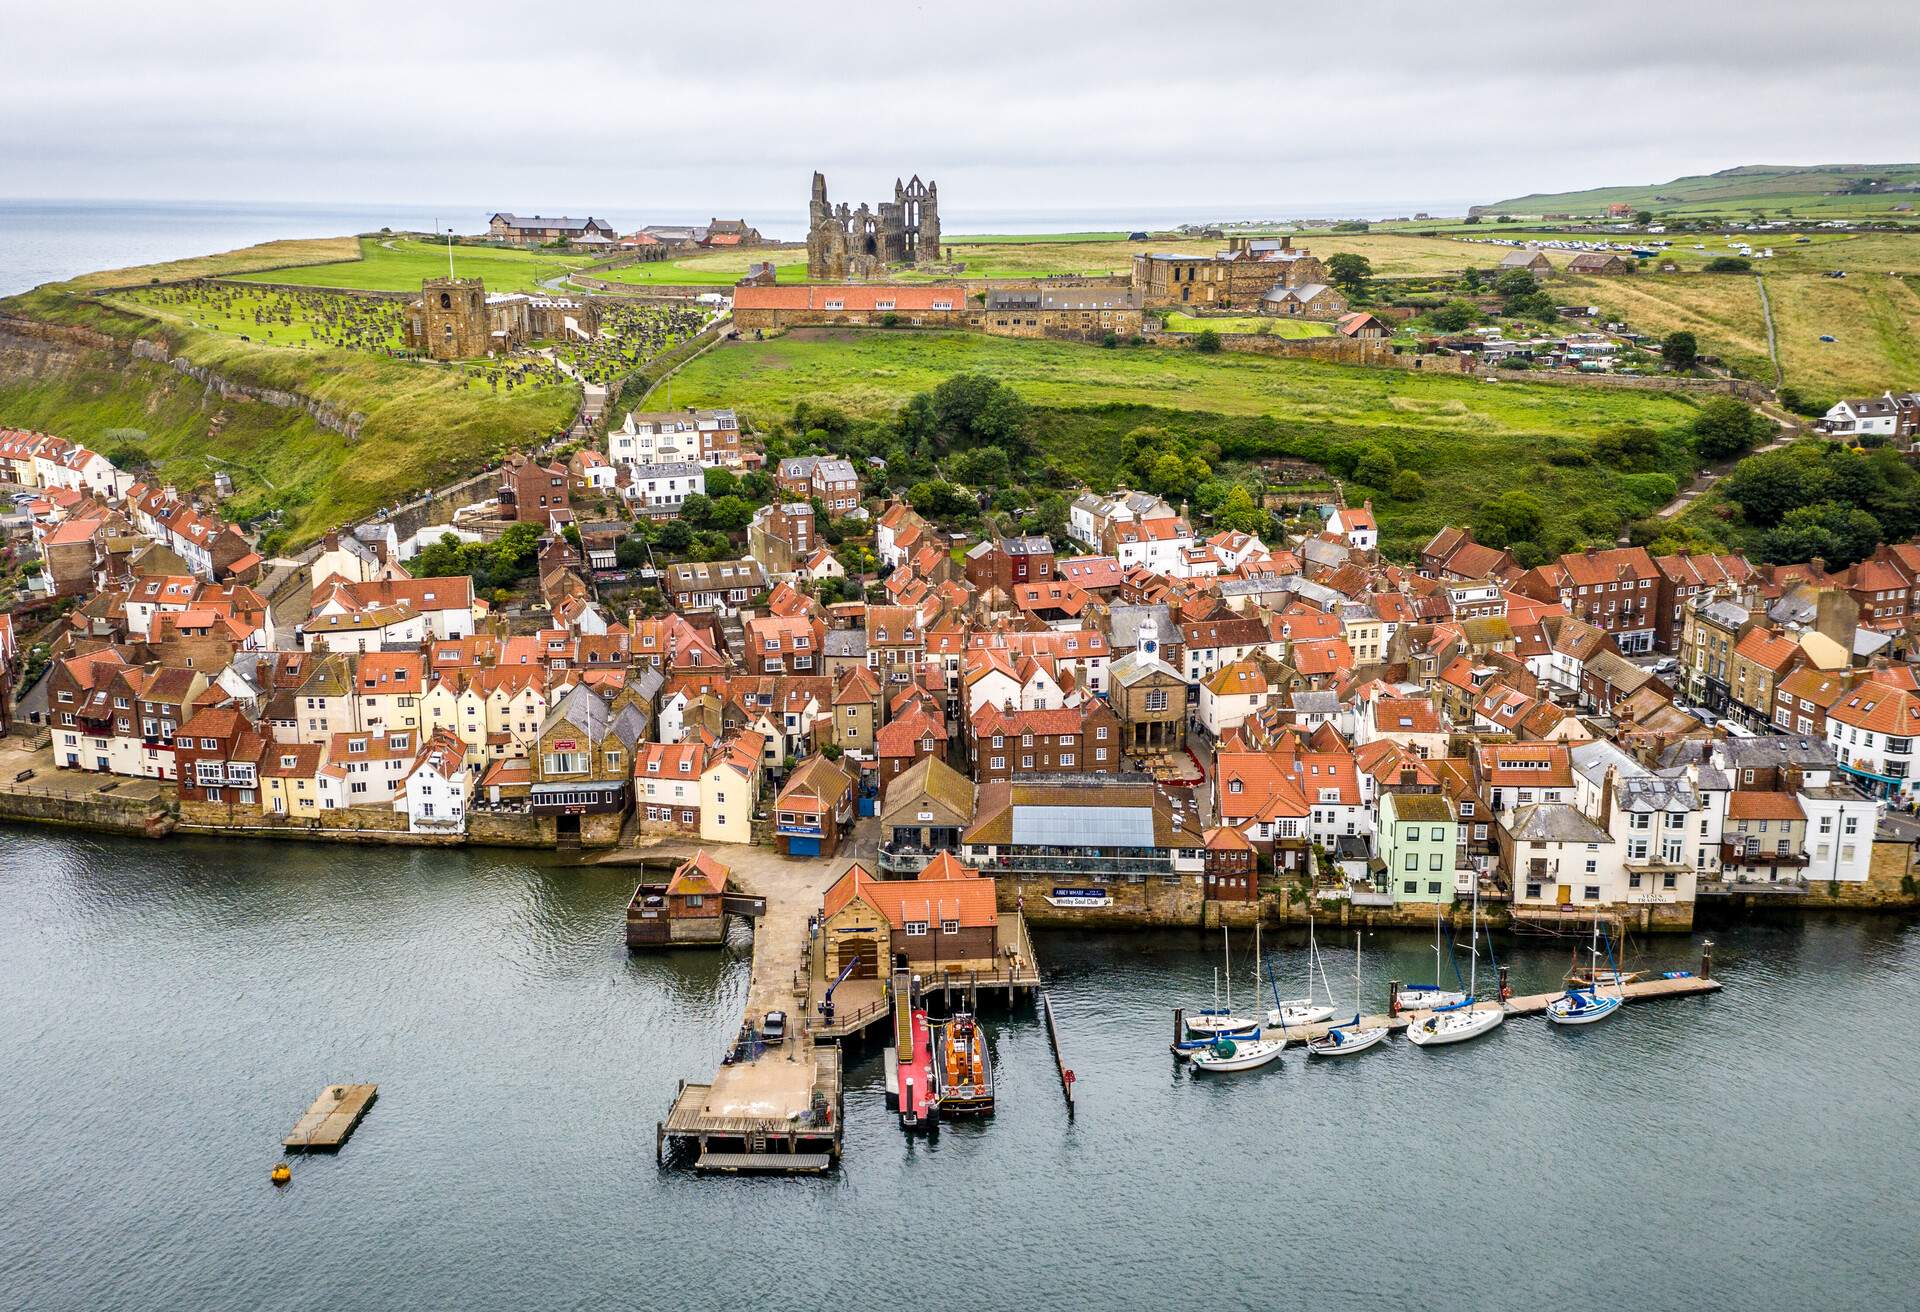 DEST_ENGLAND_WHITBY-YORKSHIRE_GETTY_1174908094